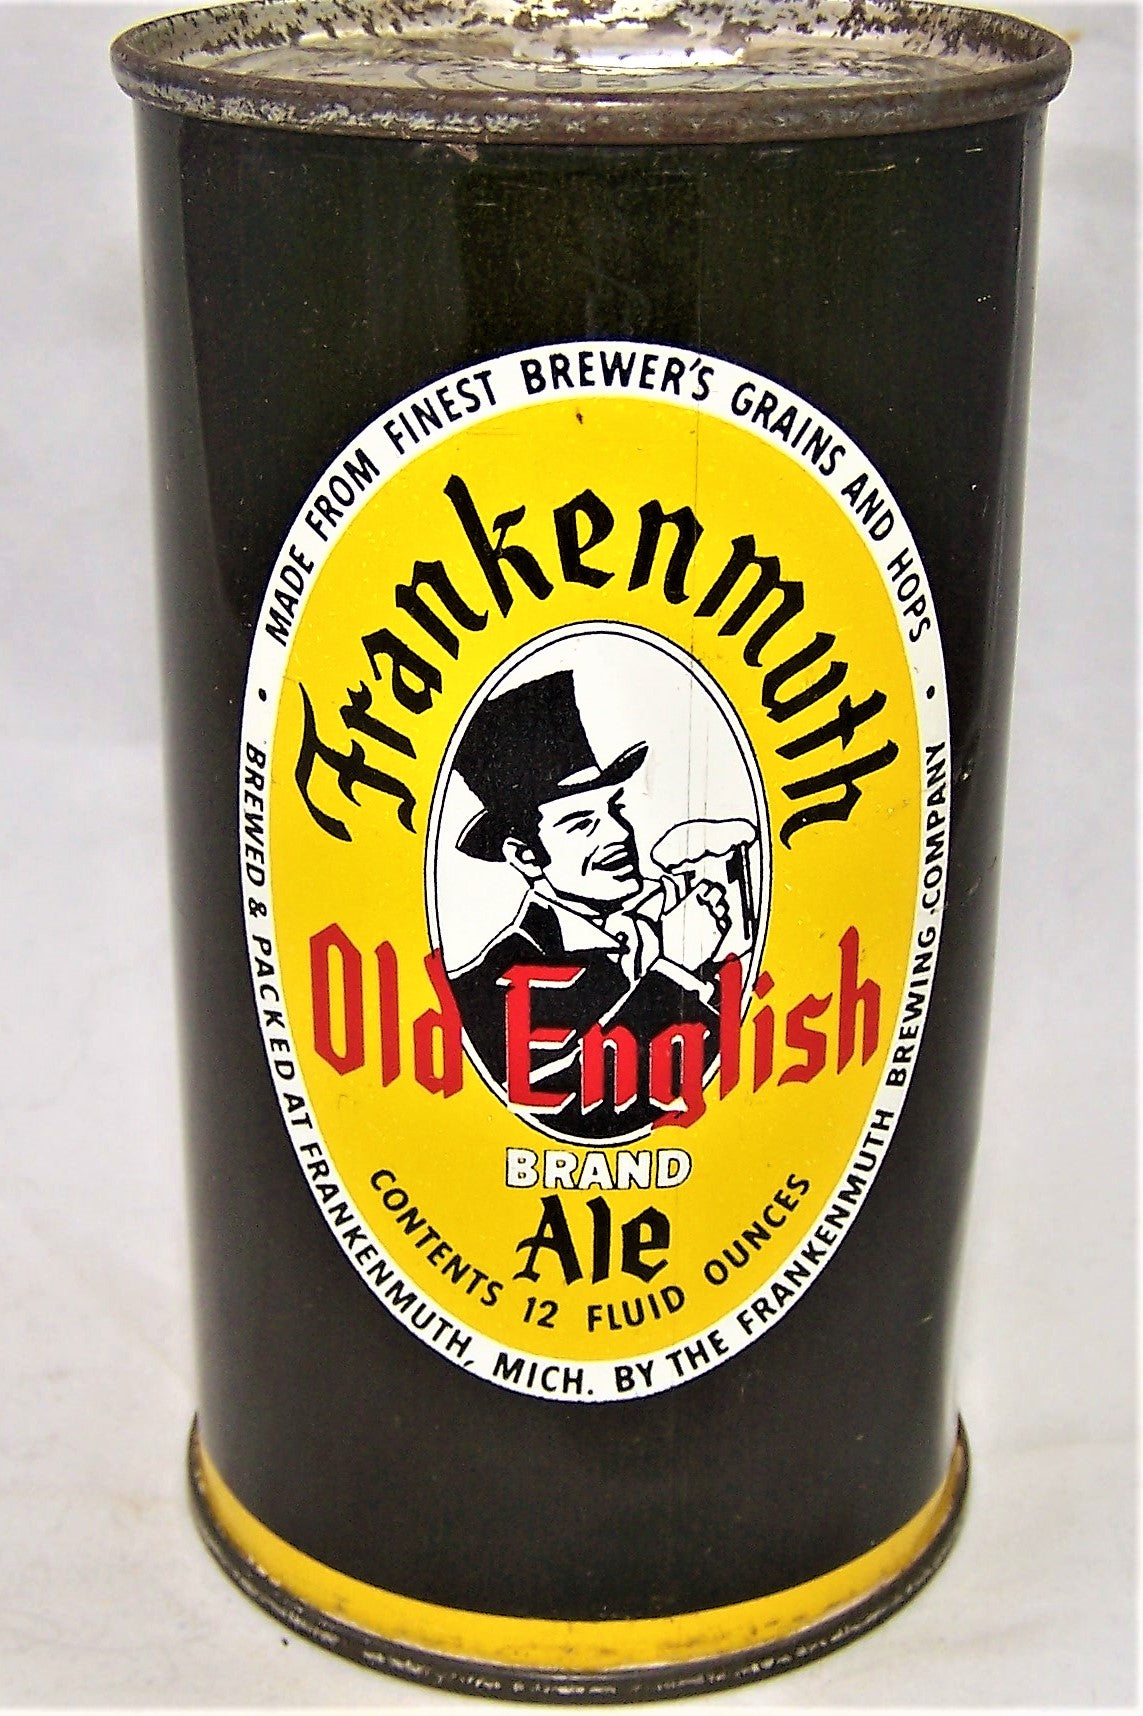 Frankenmuth Old English Brand Ale, USBC 66-24, Grade 1/1+ Sold on 02/08/19